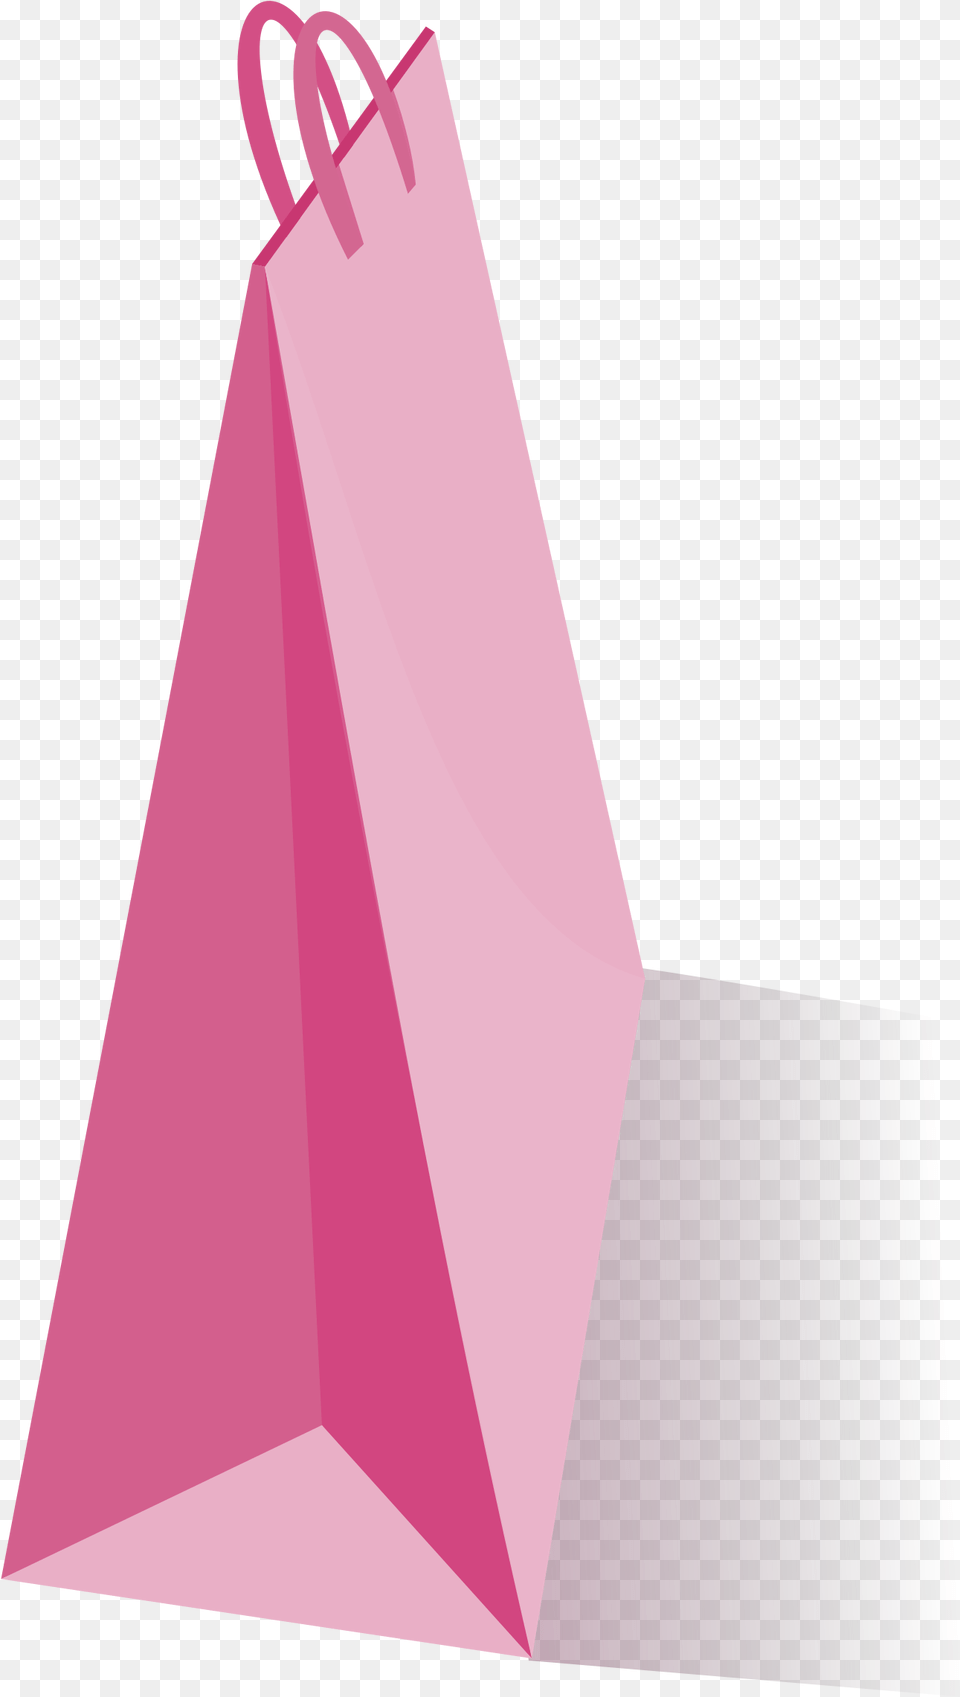 This Icons Design Of Pink Paper Bag, Shopping Bag Free Png Download